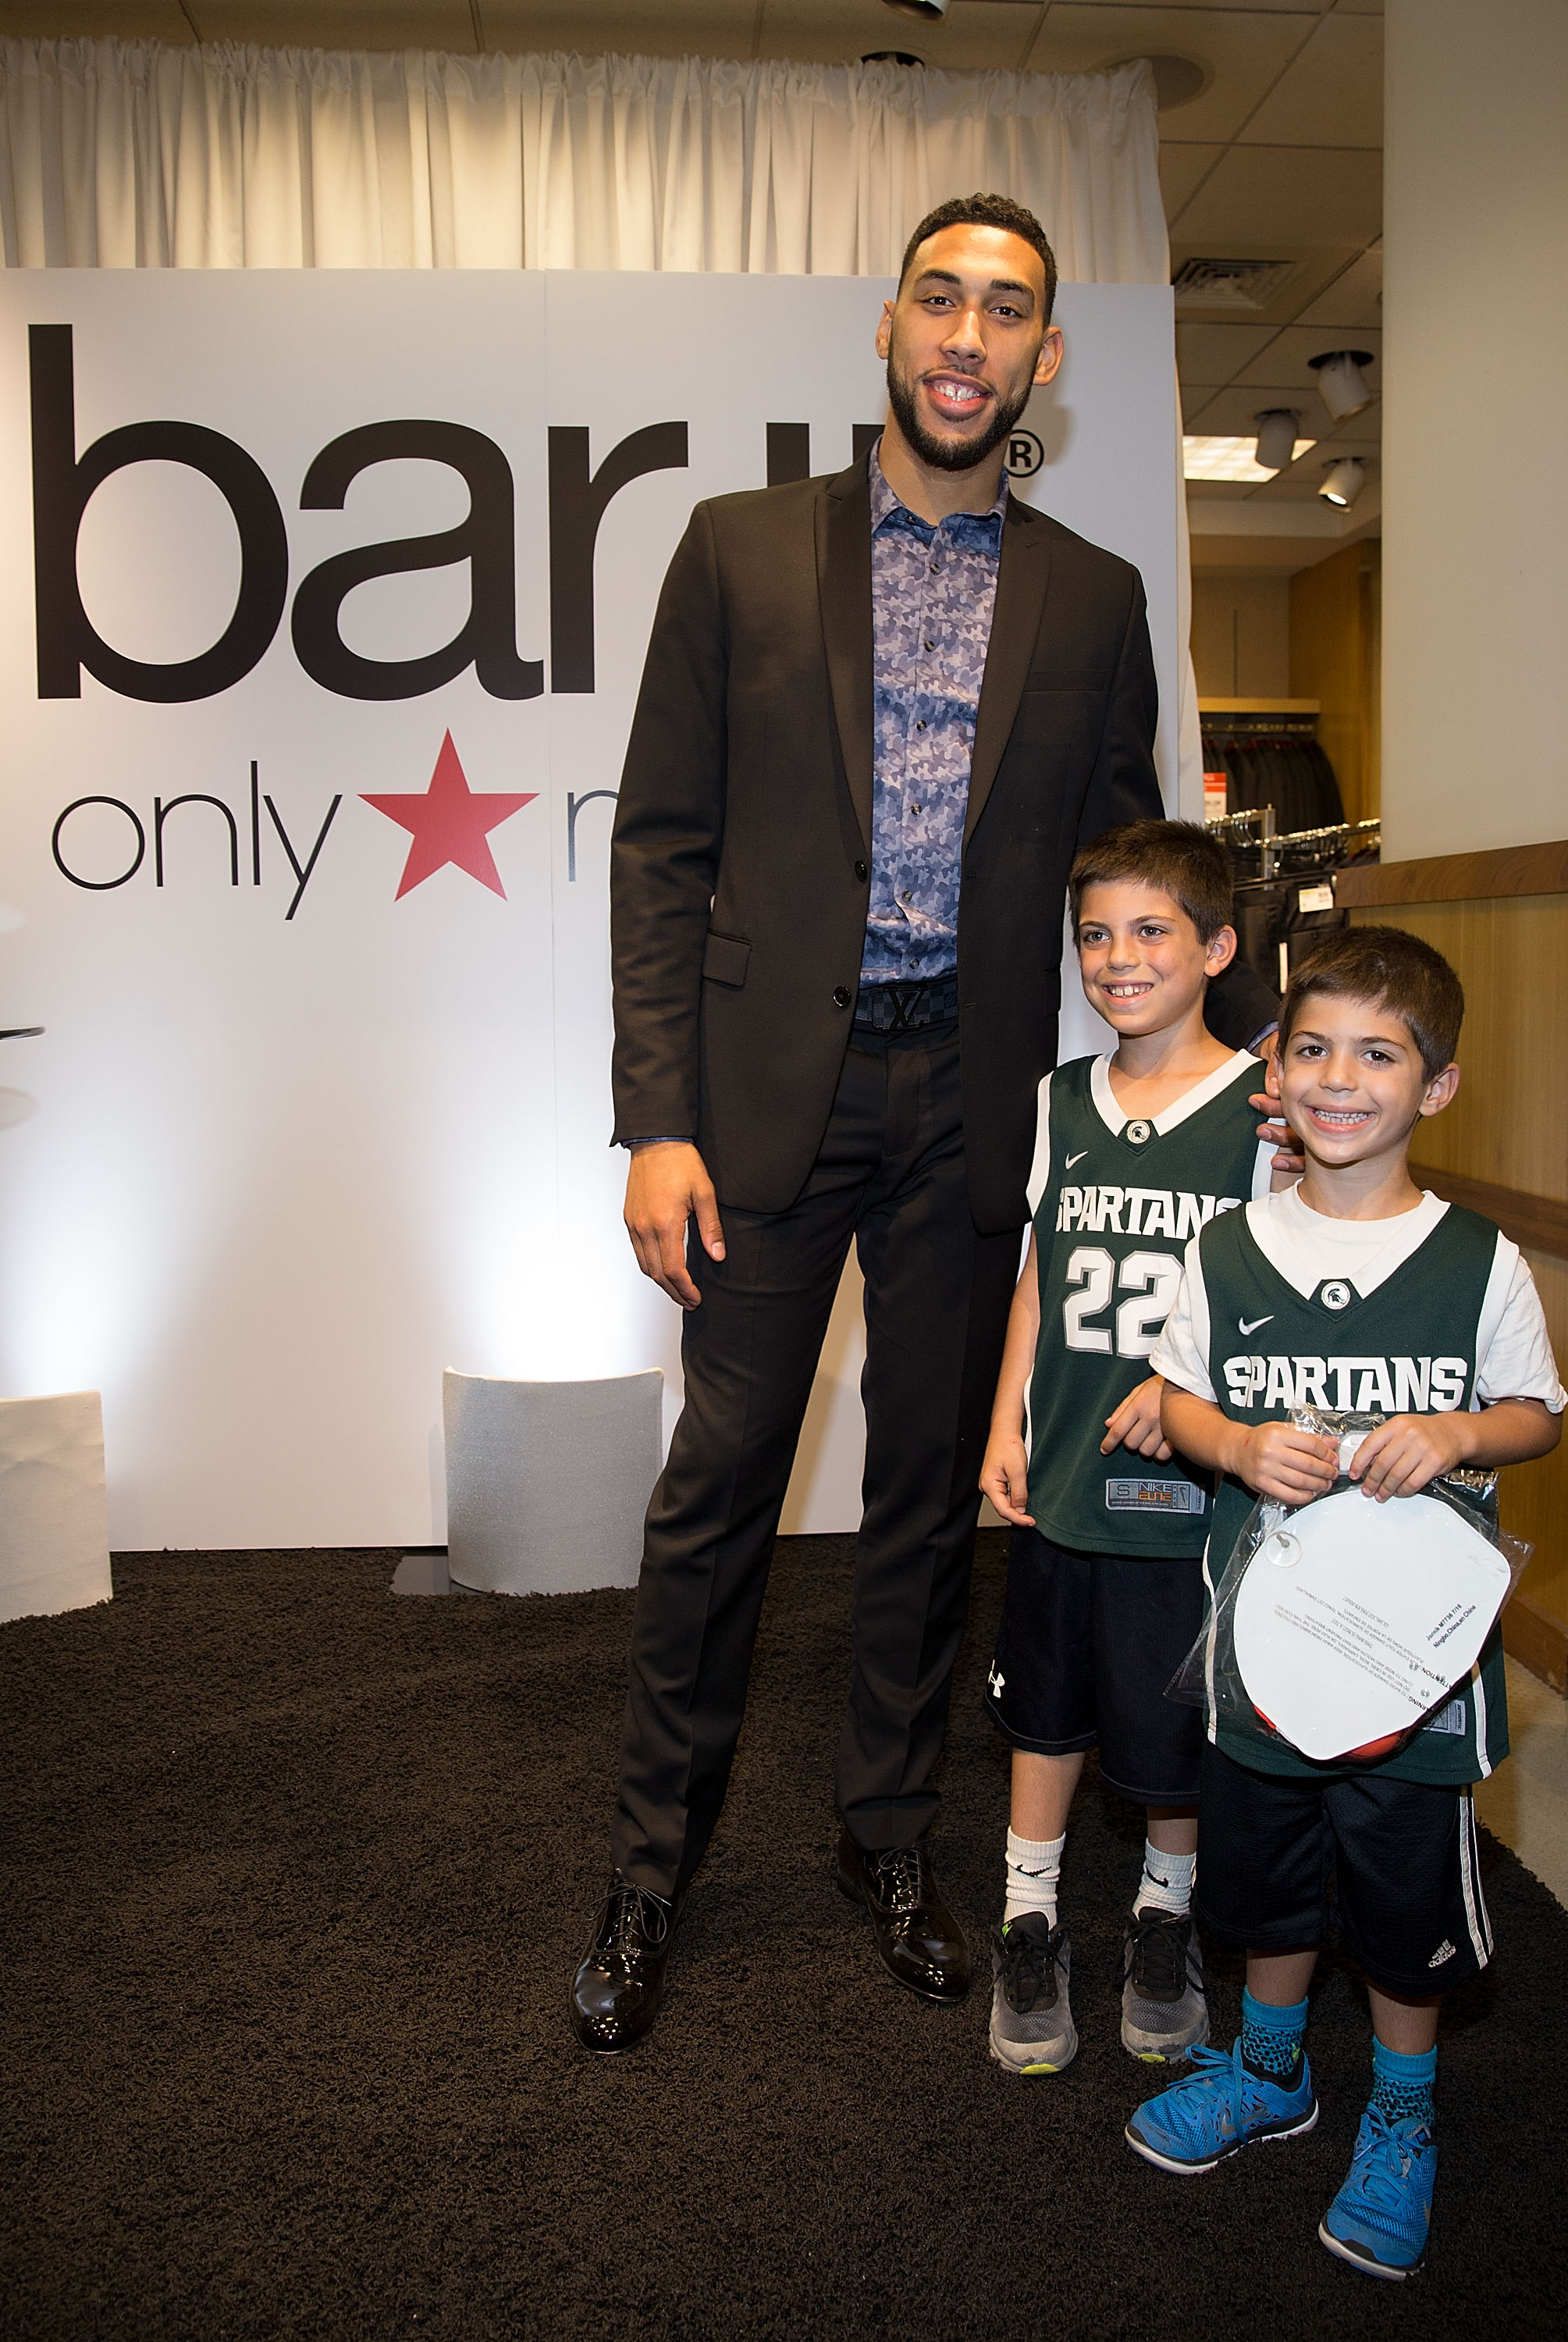 CHICAGO, IL - SEPTEMBER 23: Chicago Bulls rookie Denzel Valentine at the Bar III event at Macy's State Street on September 23, 2016 in Chicago, Illinois. (Photo by Tasos Katopodis/Getty Images for Bar III)